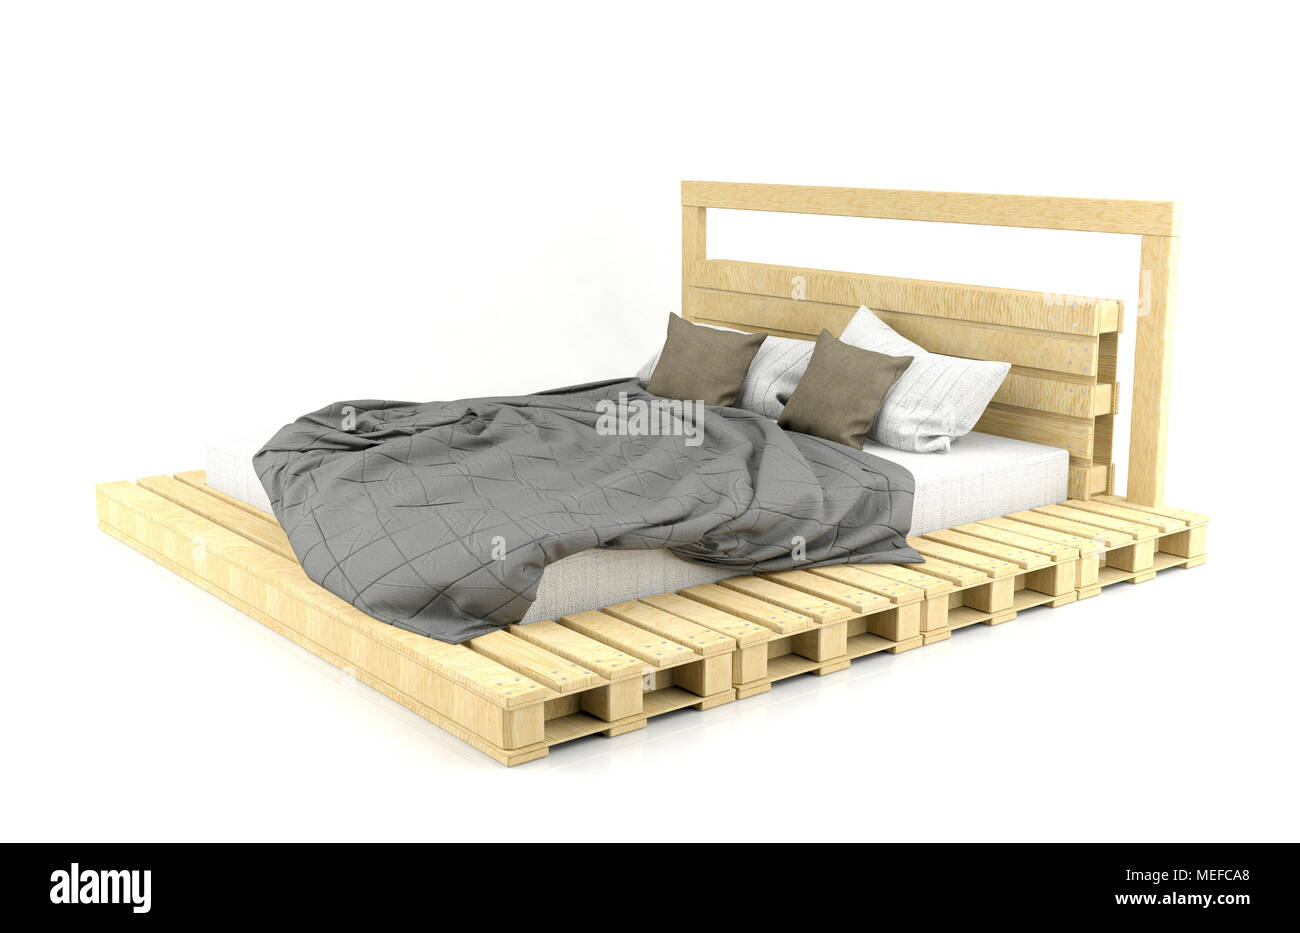 Modern and Loft design wooden bed isolated on white background Stock Photo